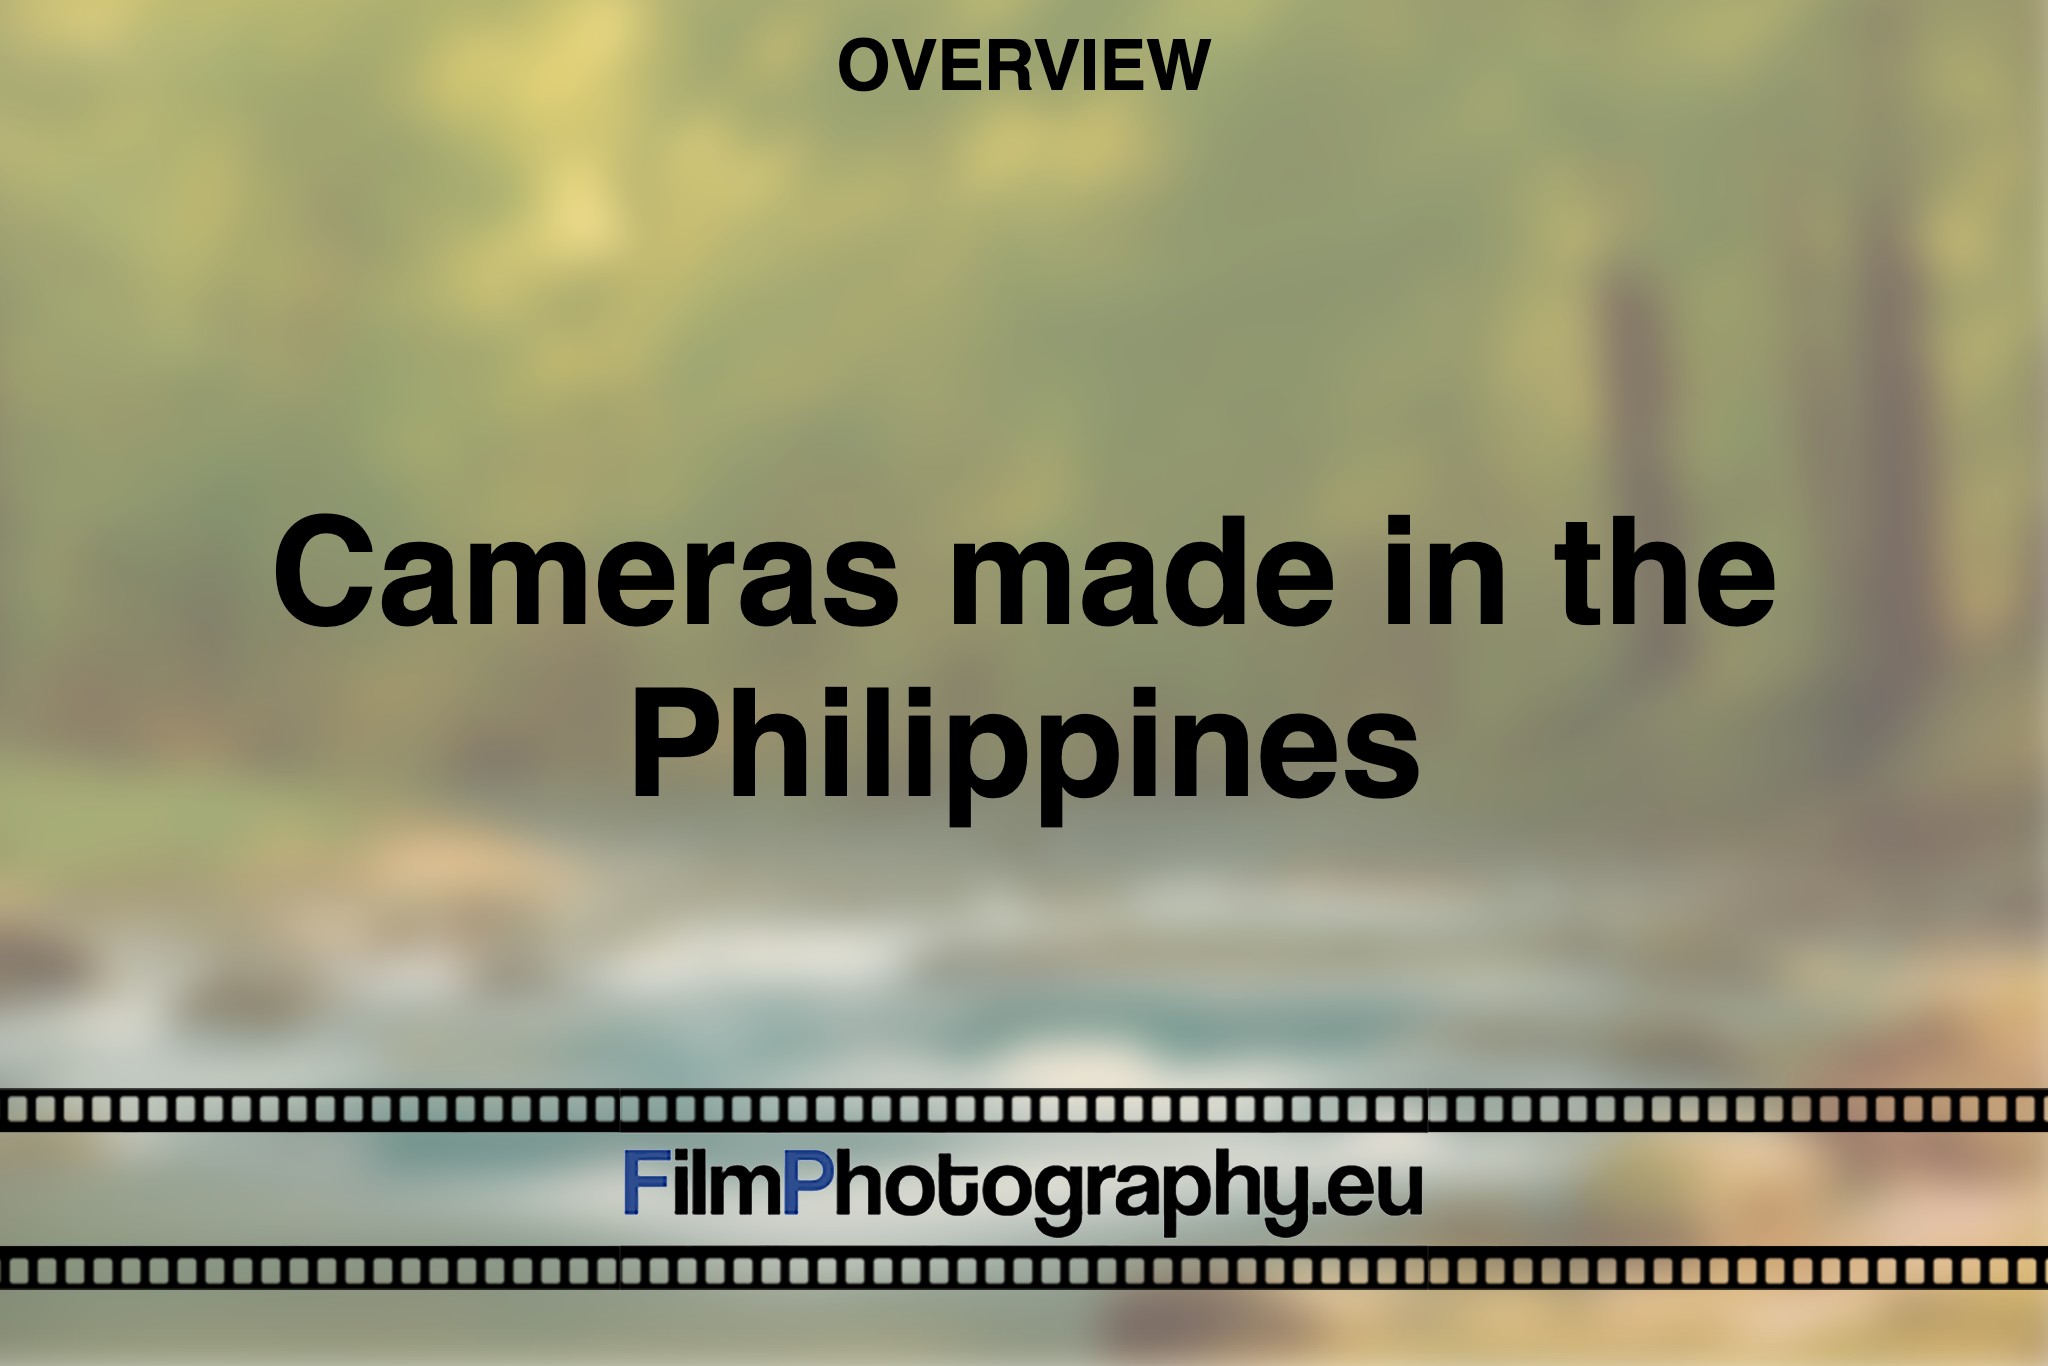 cameras-made-in-Philippines-production-factory-photo-bnv